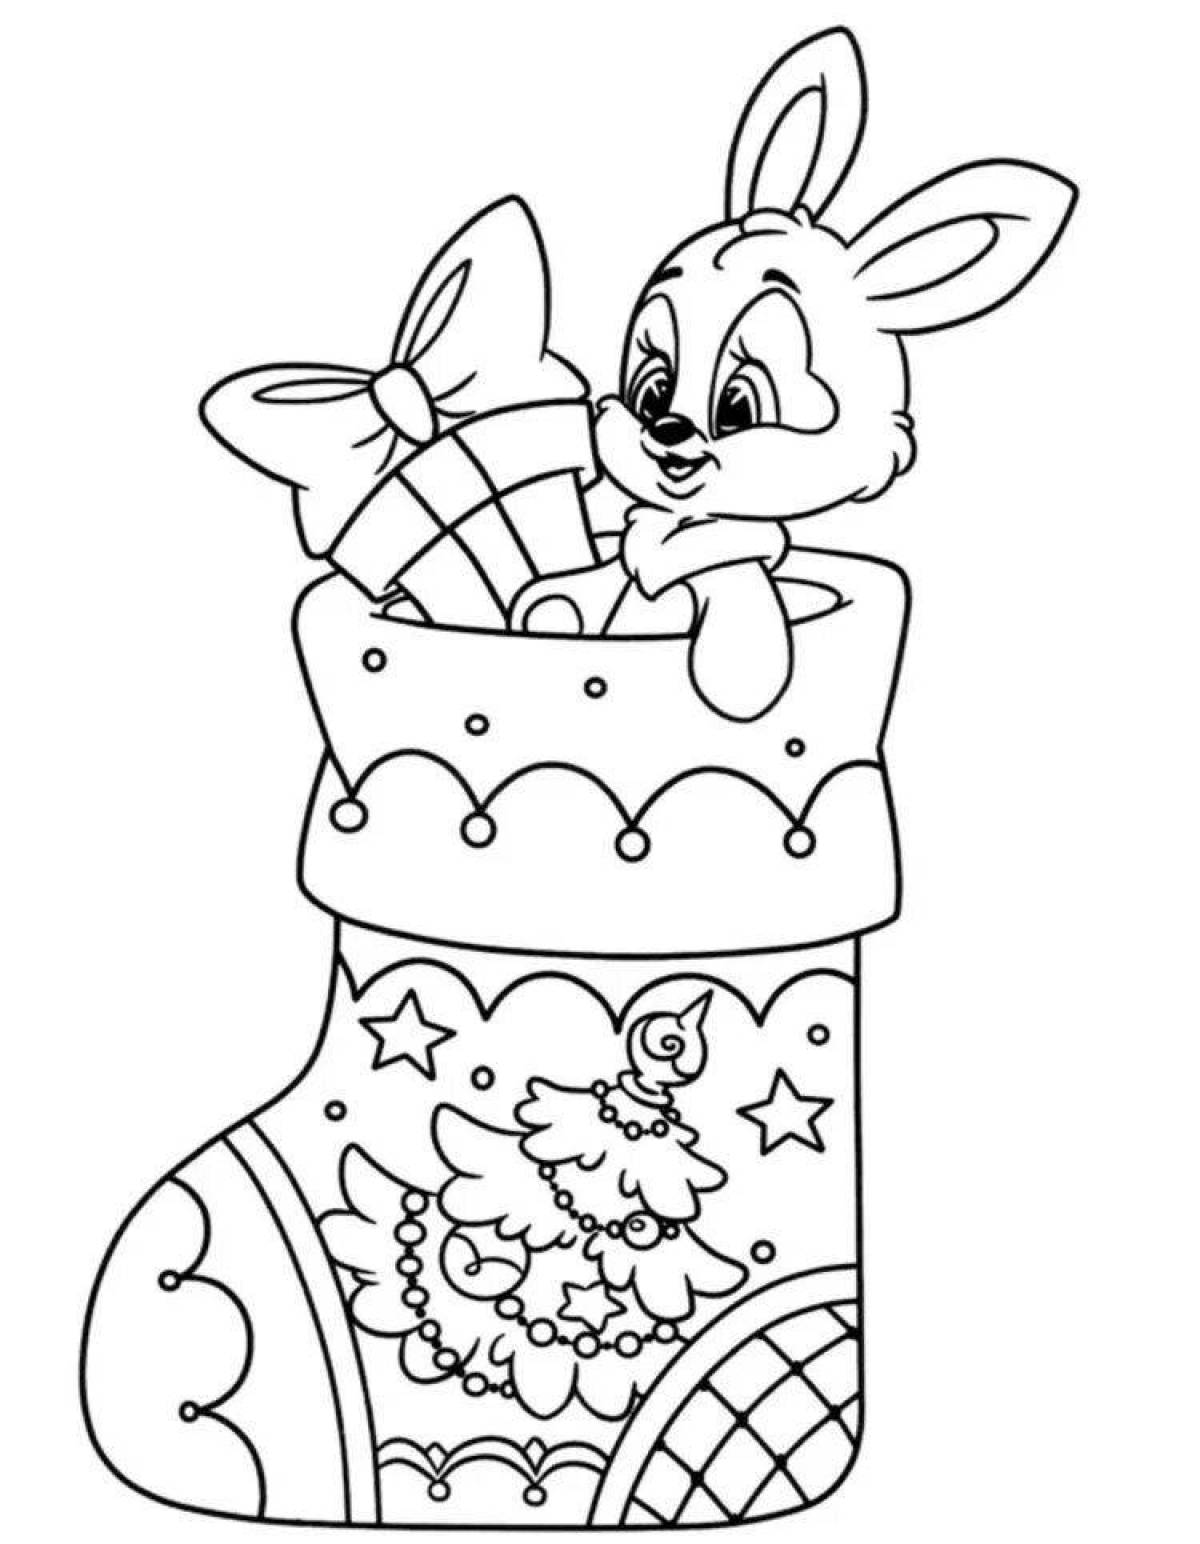 Dreamy coloring book year of the rabbit 2023